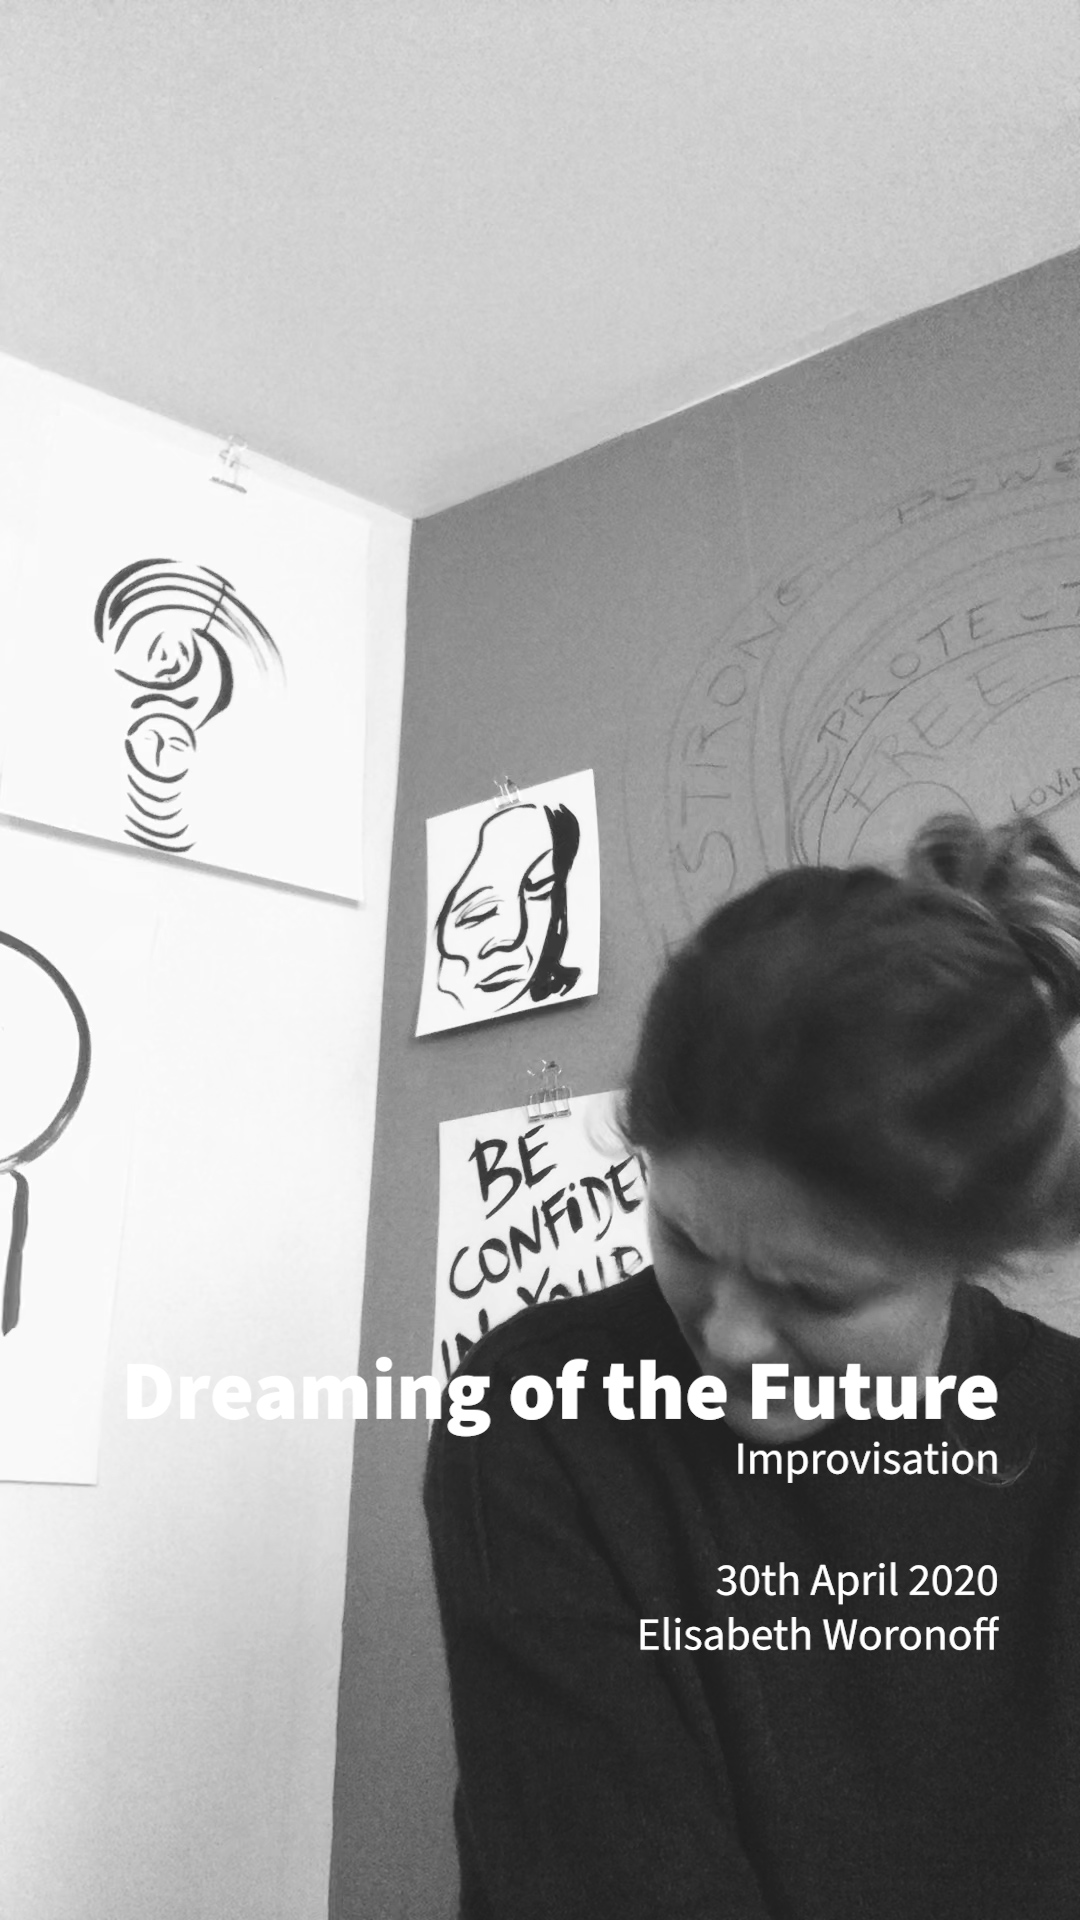 Dreaming of the future